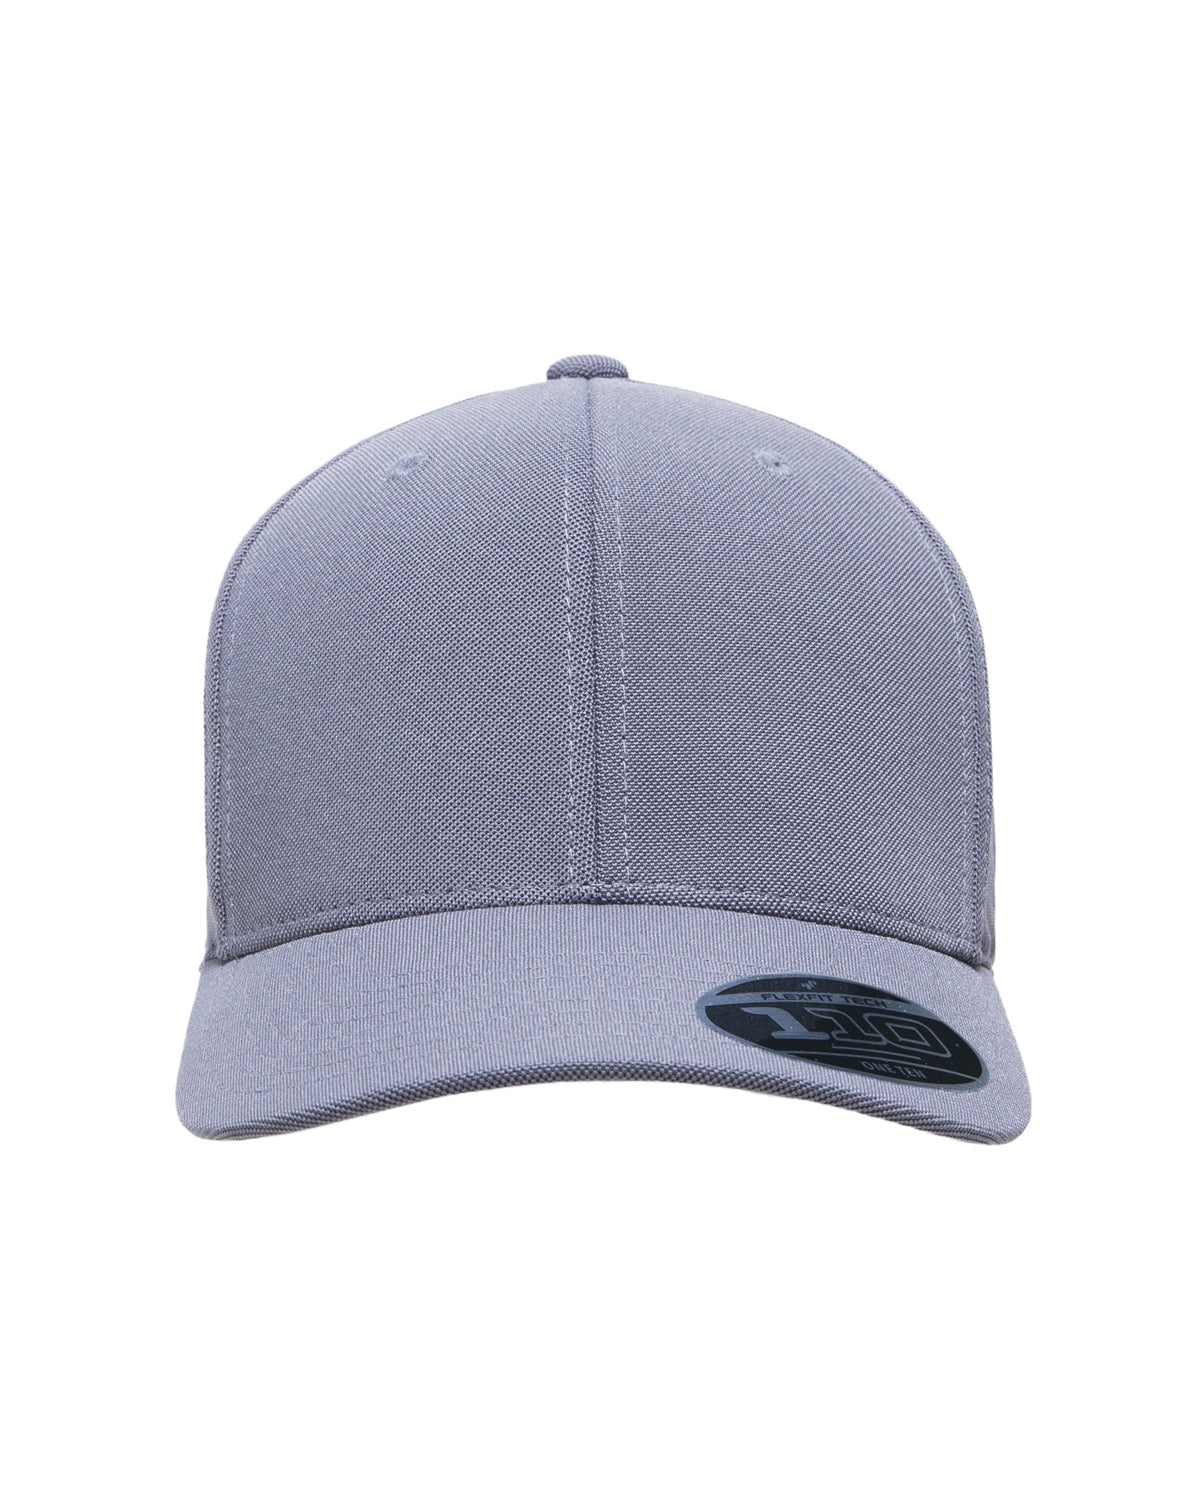 Team 365 ATB100 Mens Cool & Dry Moisture Wicking Adjustable Hat Graphite Grey Front